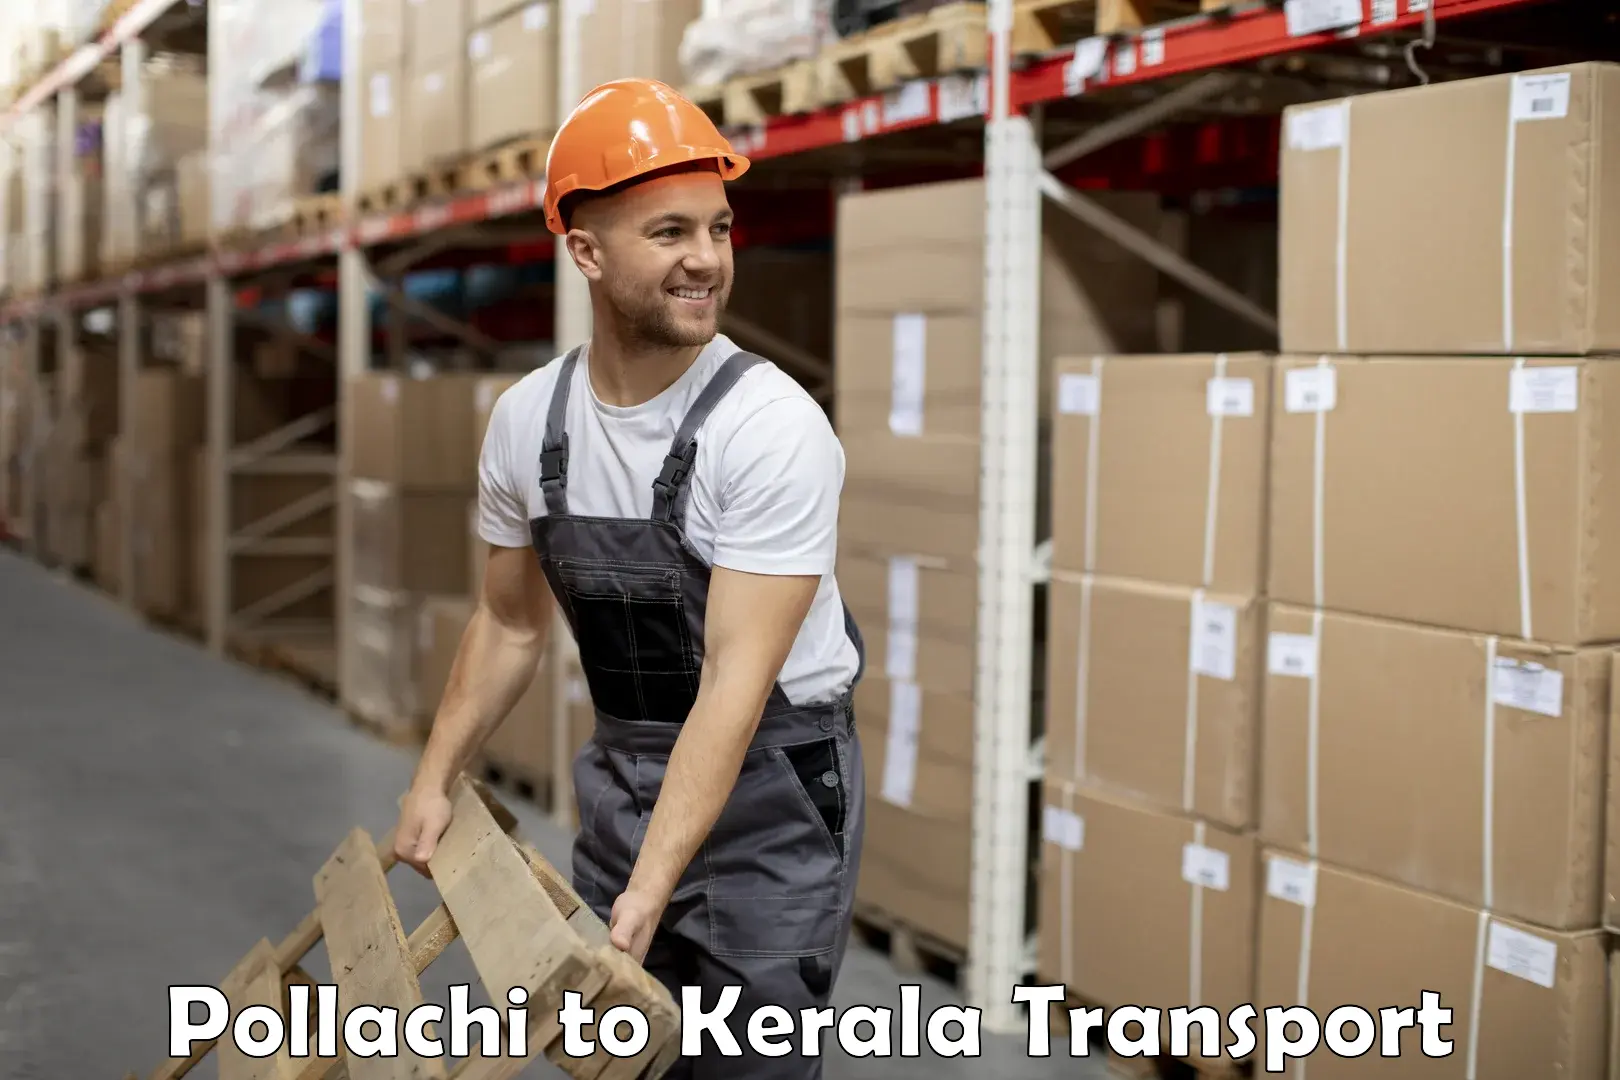 Nearby transport service Pollachi to Kerala